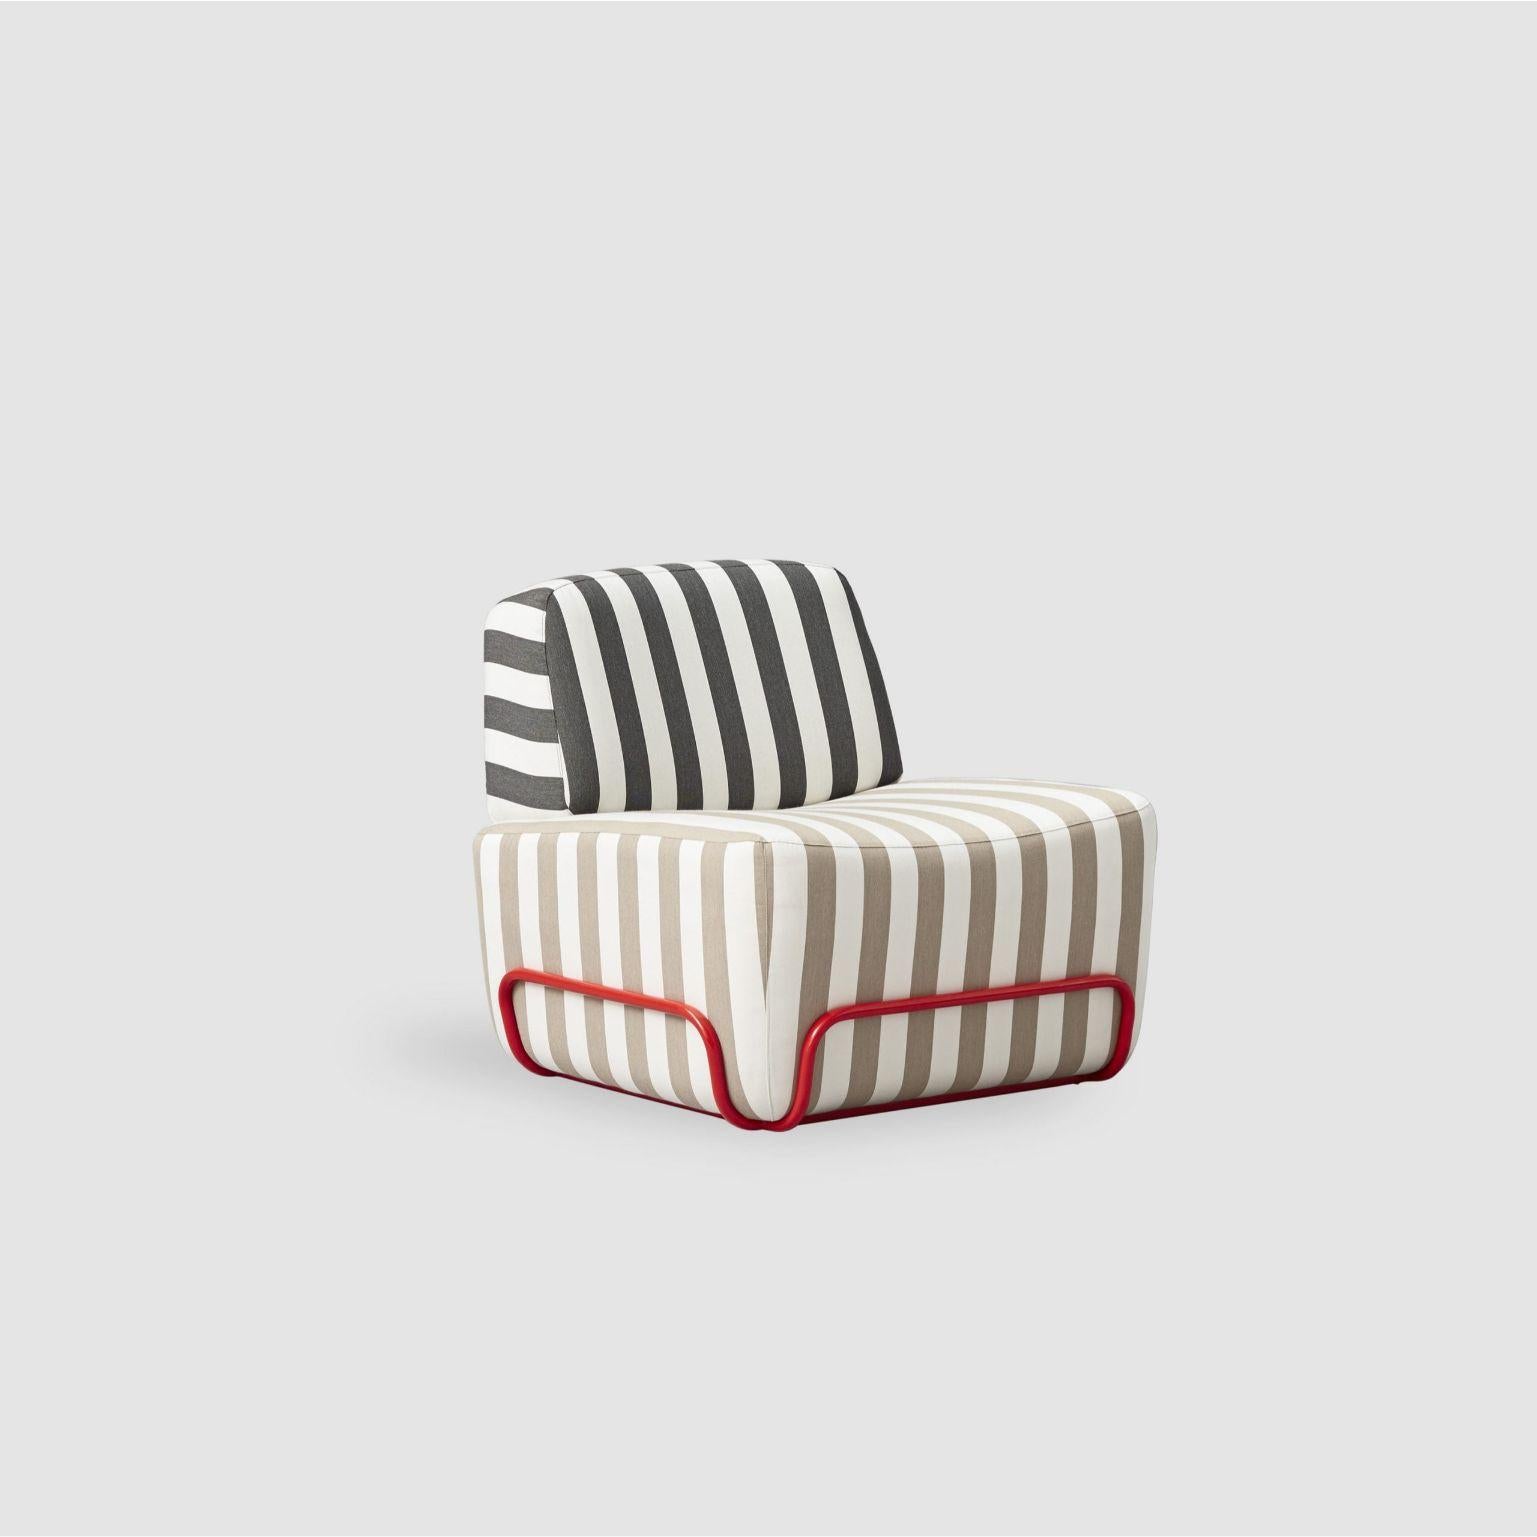 Pigro armchair by Pepe Albargues
Dimensions: W83, D90, H77, Seat 42
Materials: Pine wood structure, tablex and particles board
Foam CMHR (high resilience and flame retardant) for all our cushion filling systems
Painted iron structure